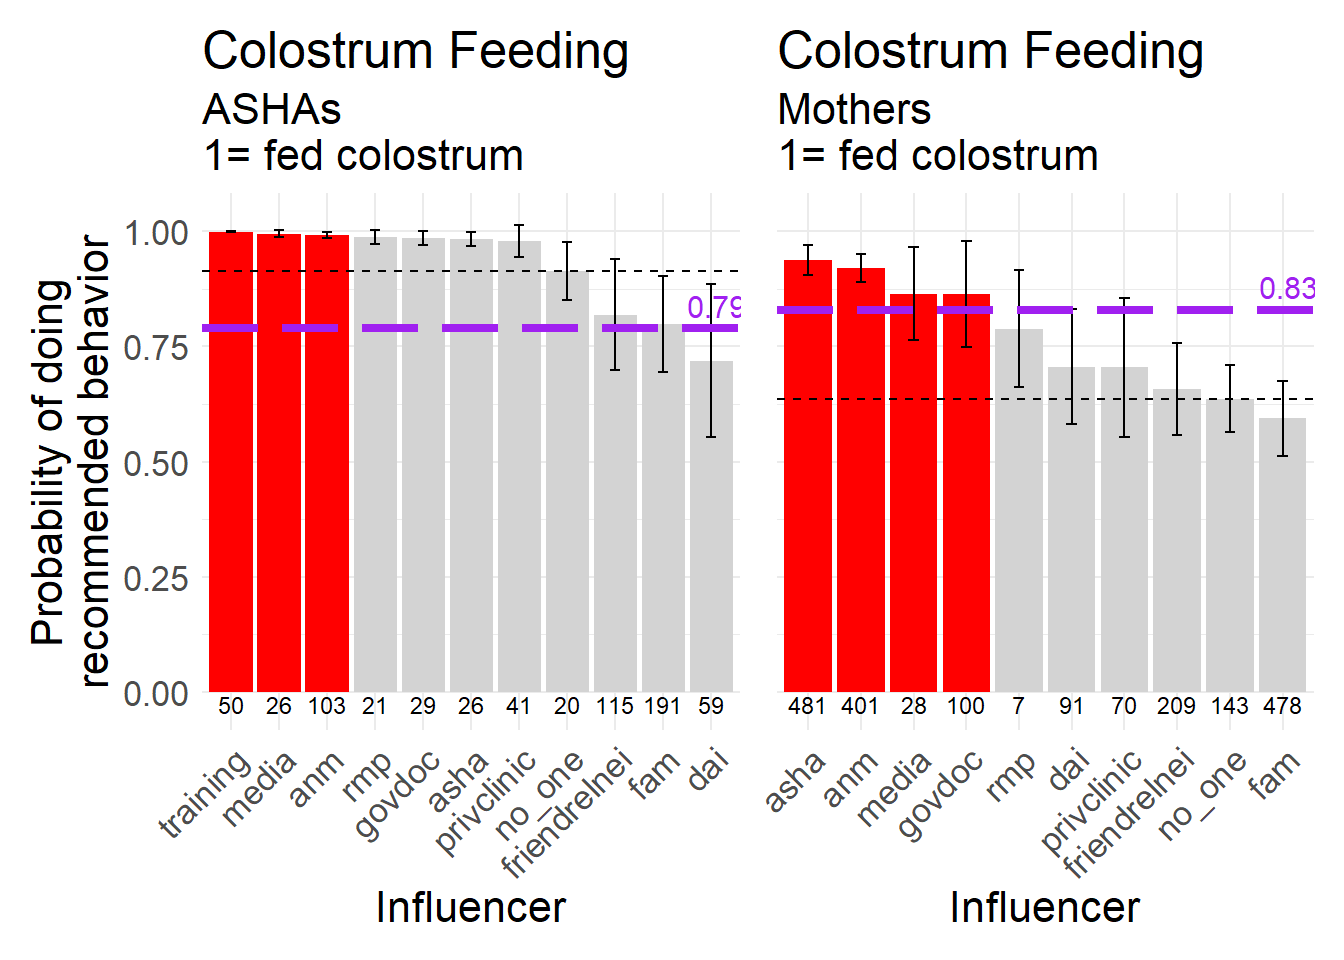 Feeding the newborn colostrum, a biomedically recommended behavior, 1 = fed the baby colostrum.